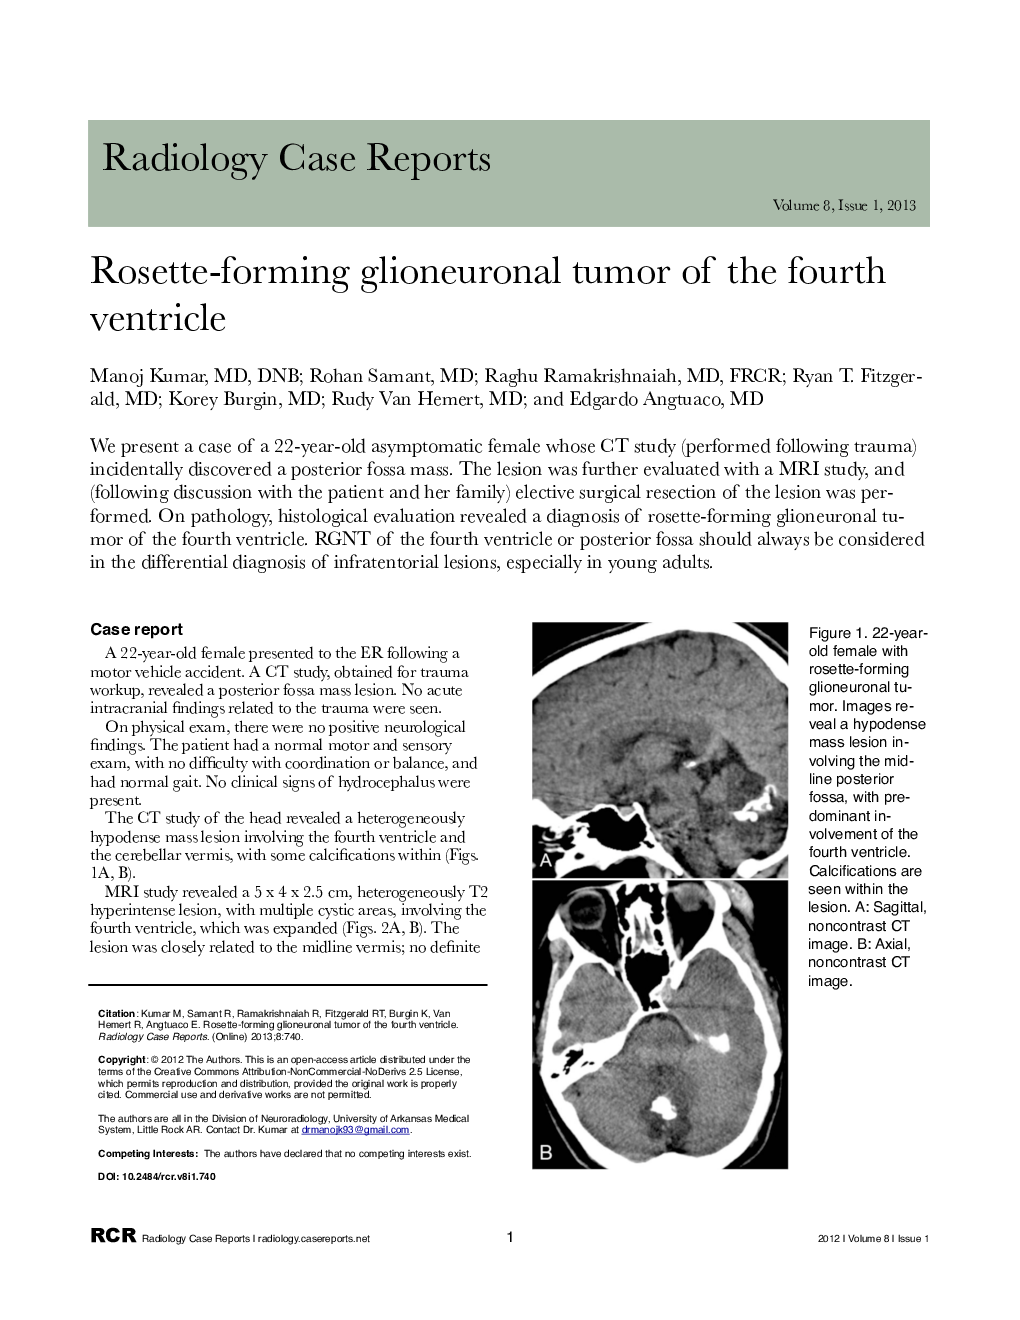 Rosette-forming glioneuronal tumor of the fourth ventricle